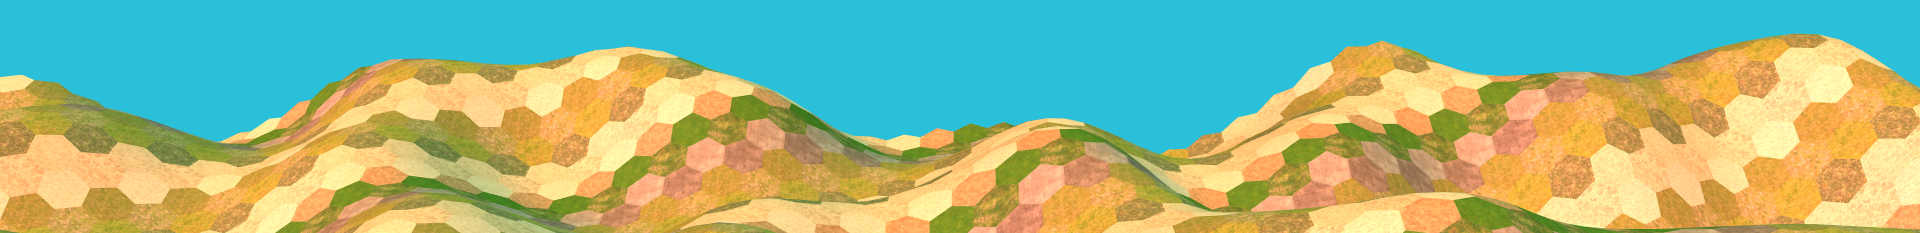 Hills with hexagons imposed.